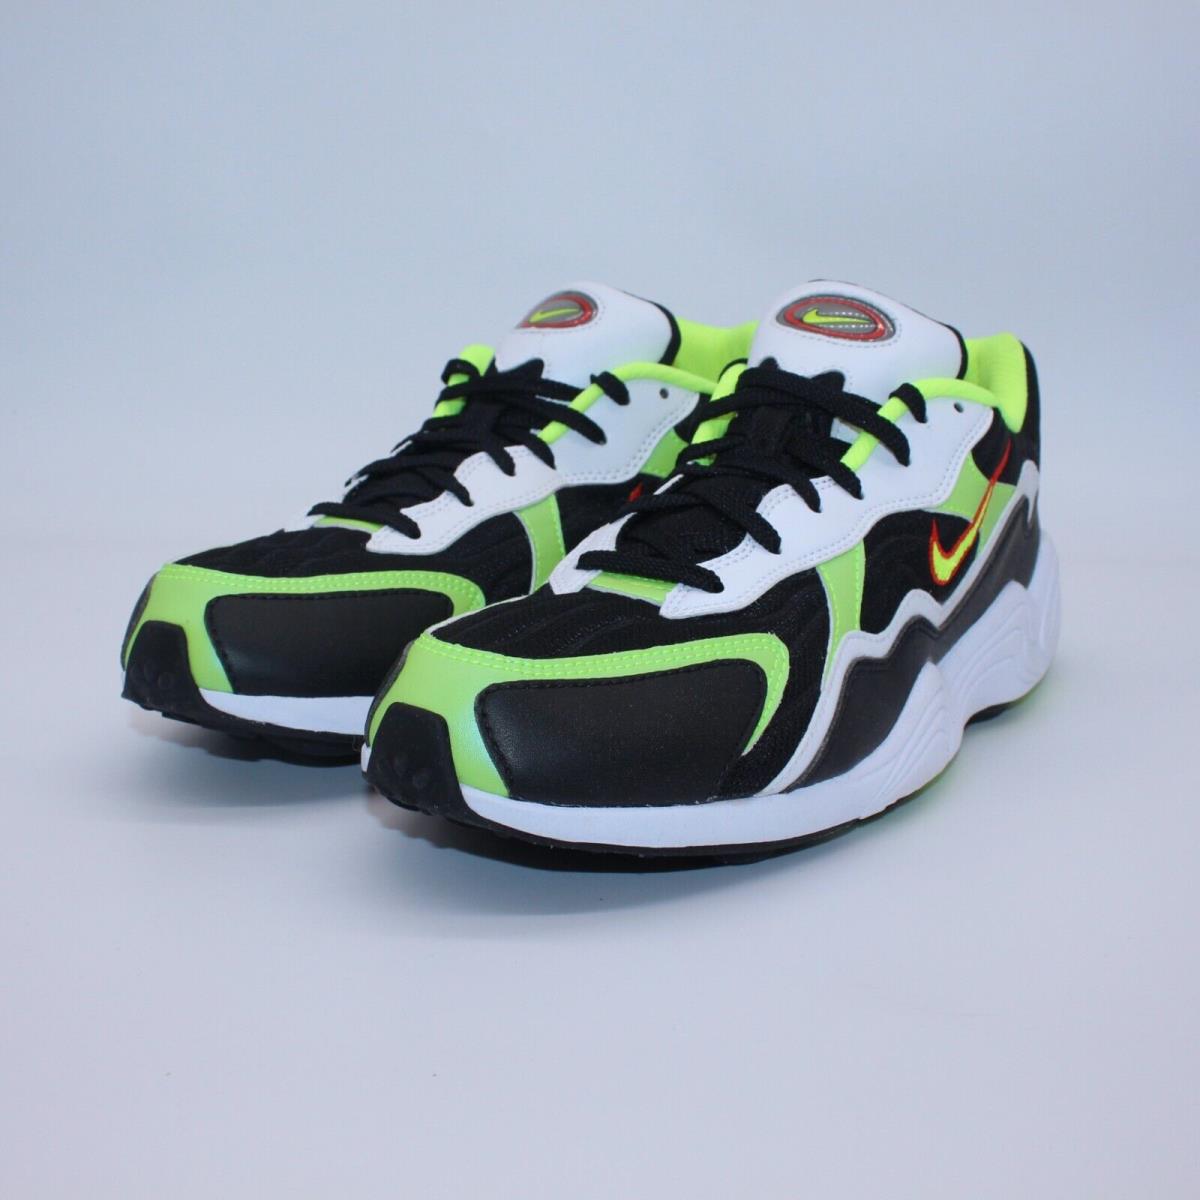 Nike shoes Air Zoom Alpha - White, black, volt, habanero red 5